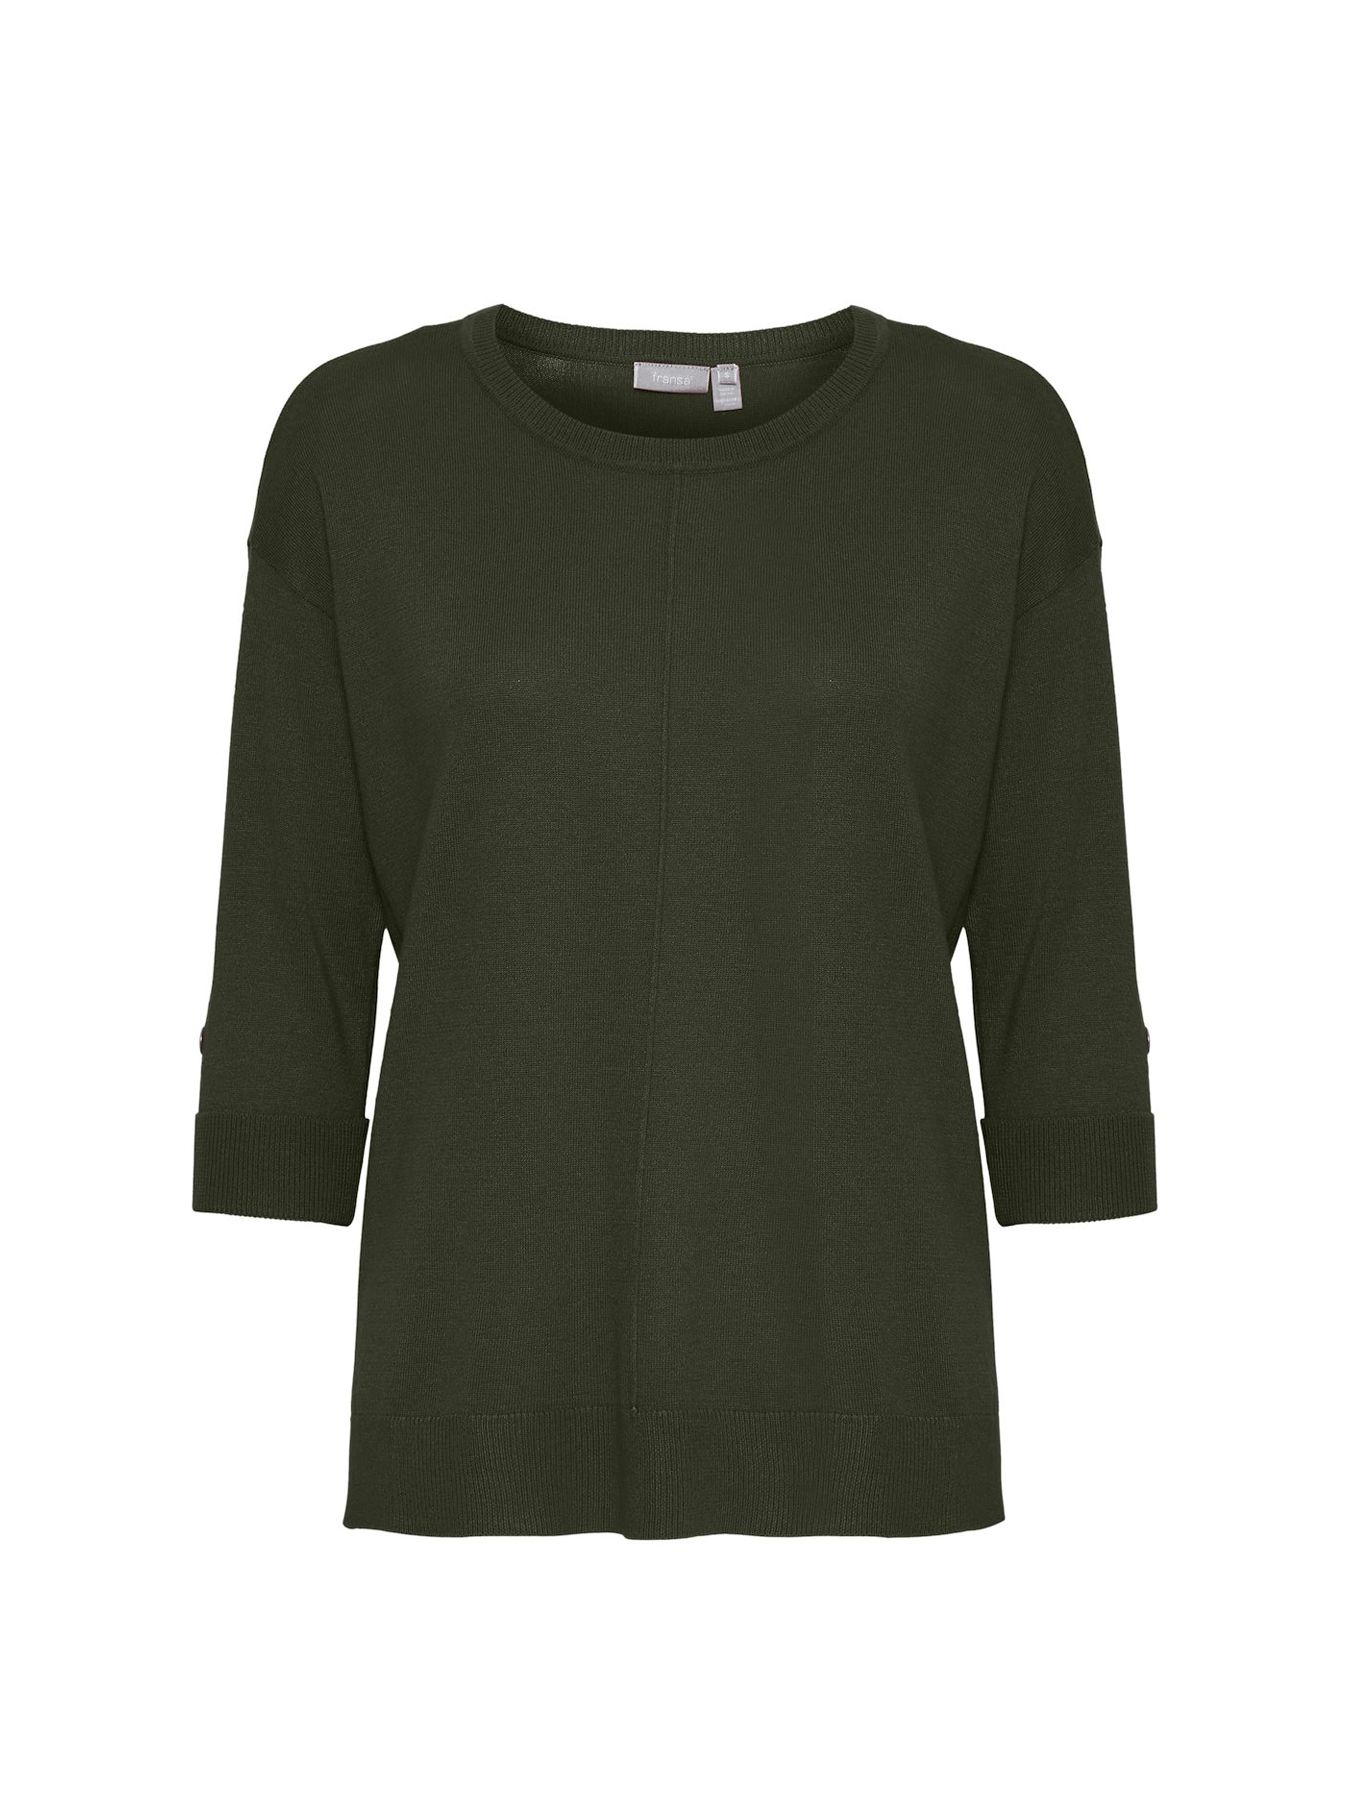 Fransa frBesmock 2 pullover 190419 Rifle 00106187-190419